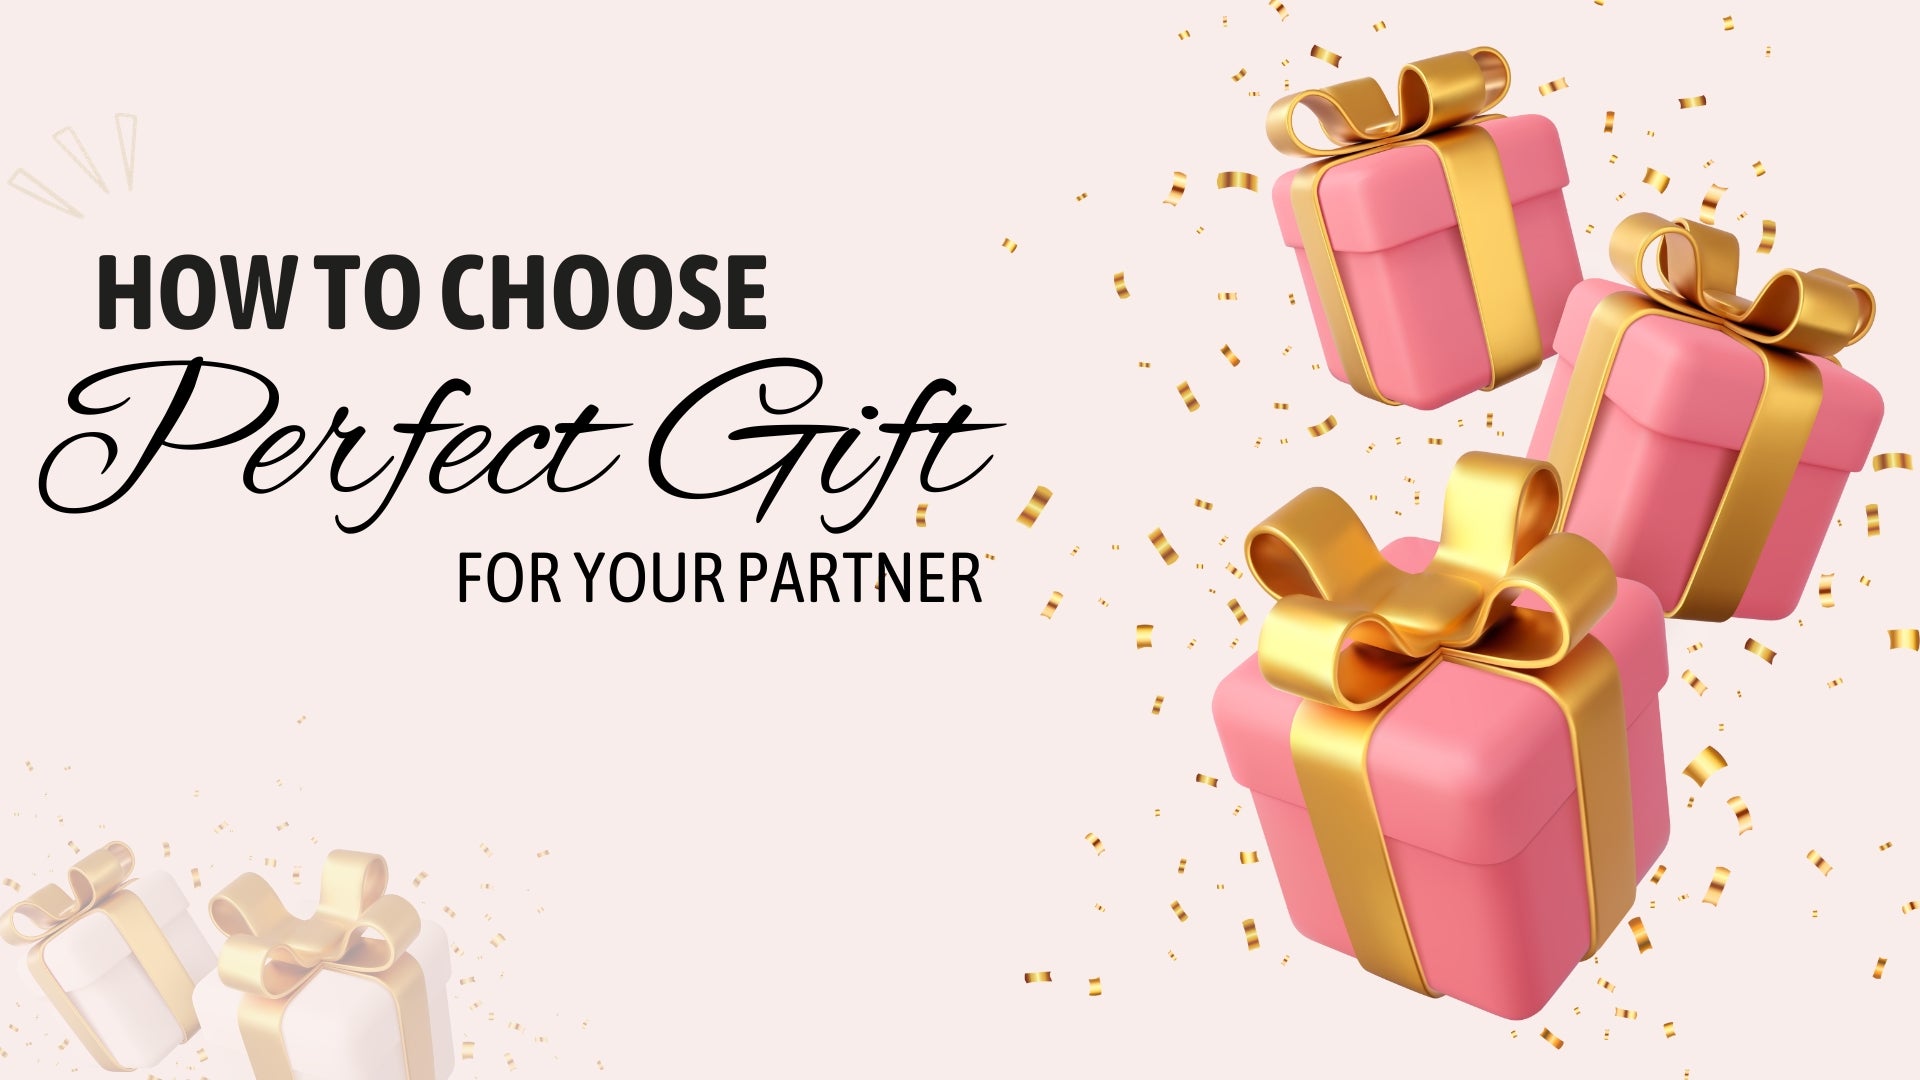 These 5 Startups Give you Unique Gifting Options for your Valentine |  Entrepreneur